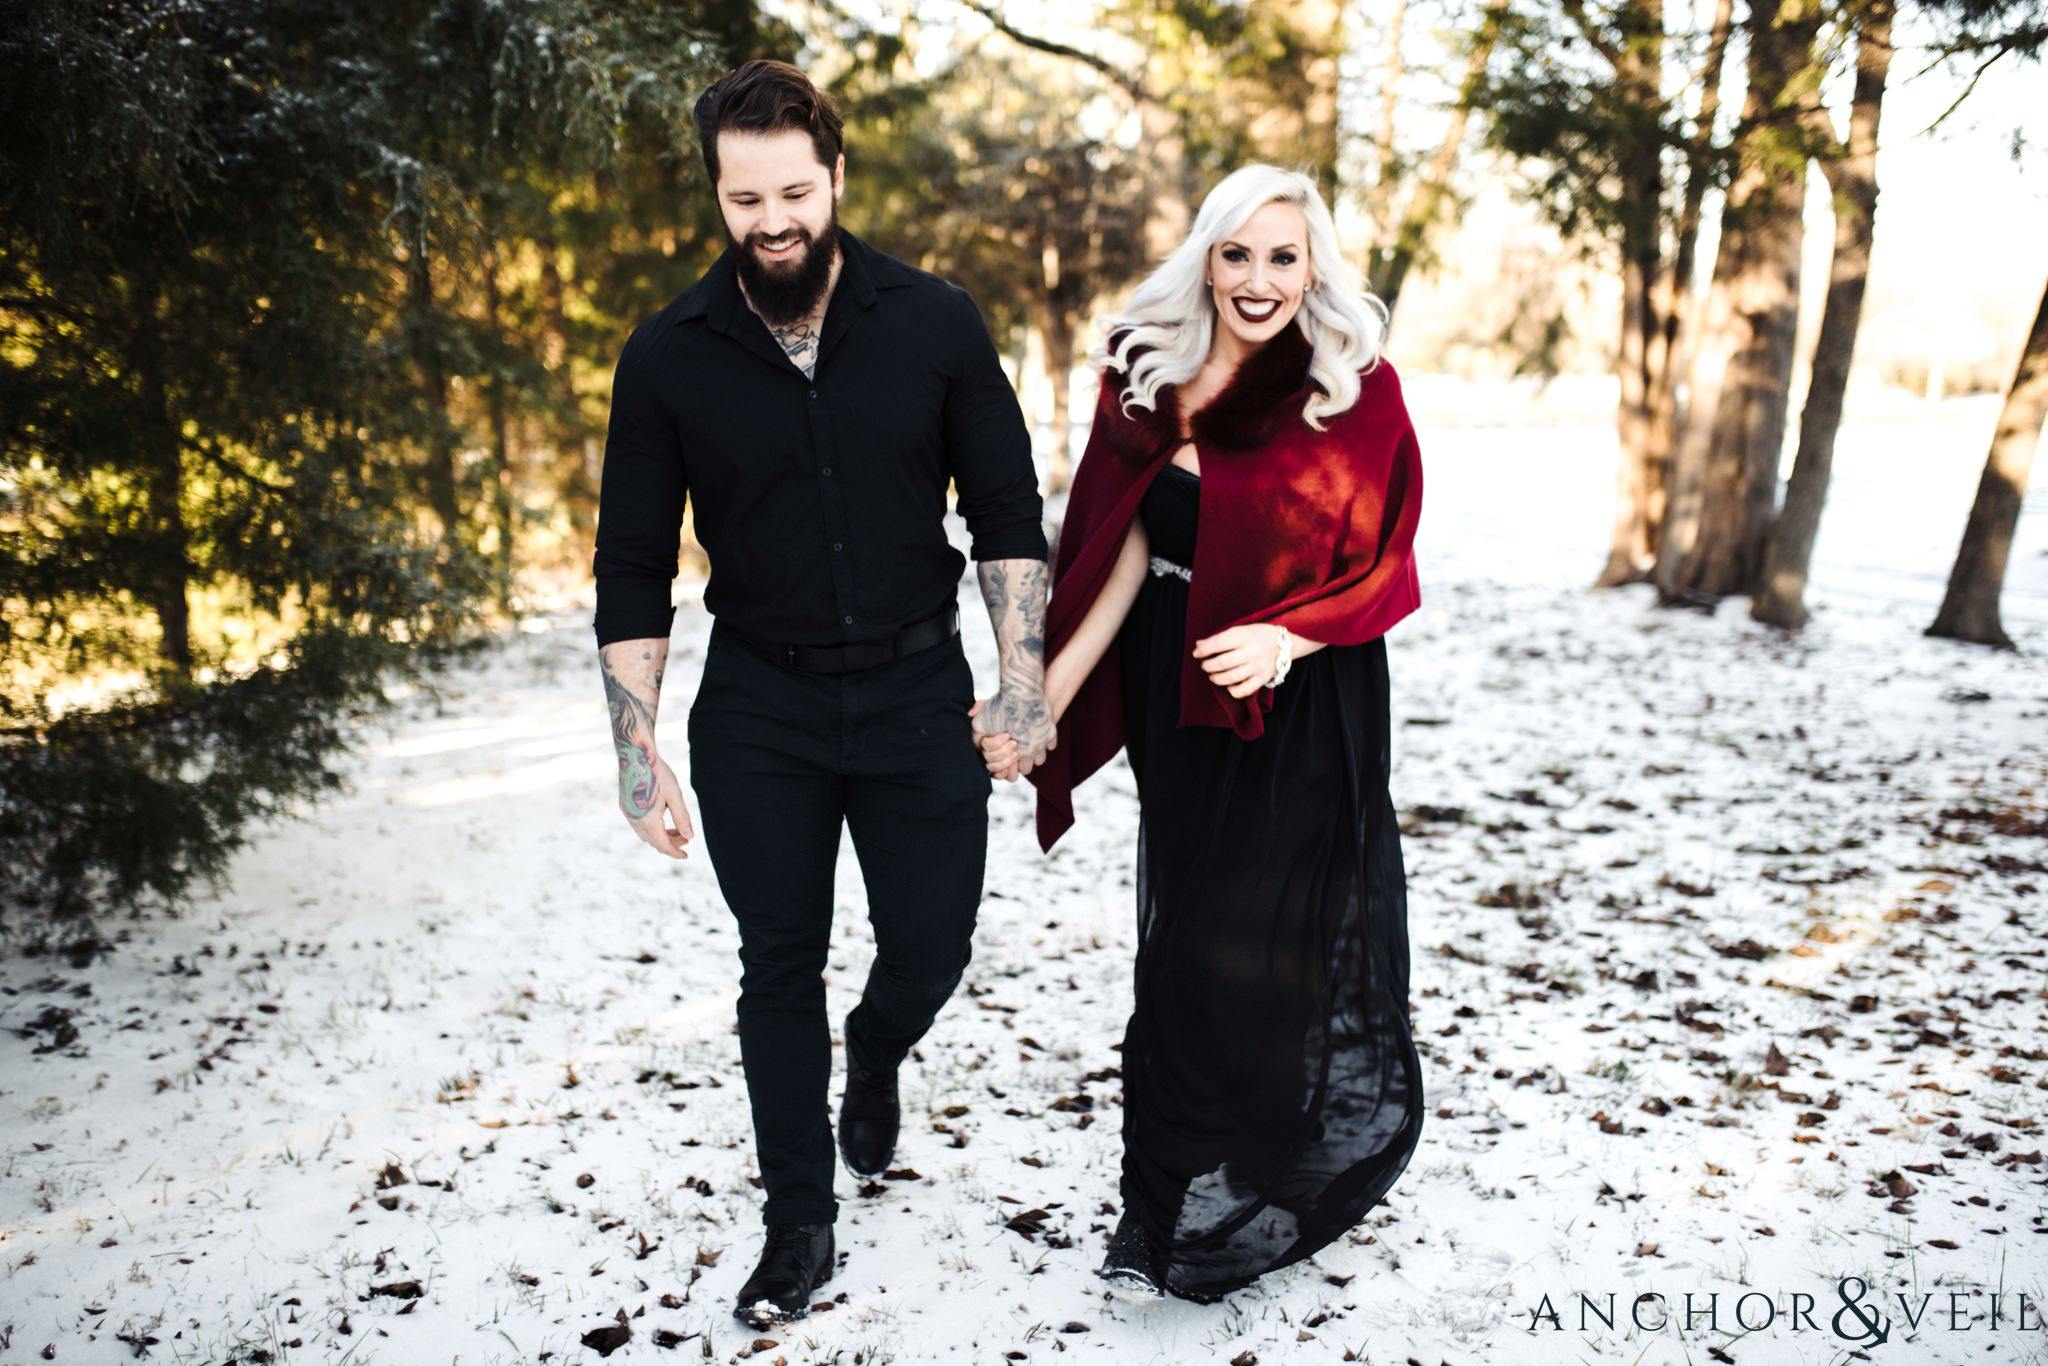 walking hand in hand during their charlotte snow engagement session